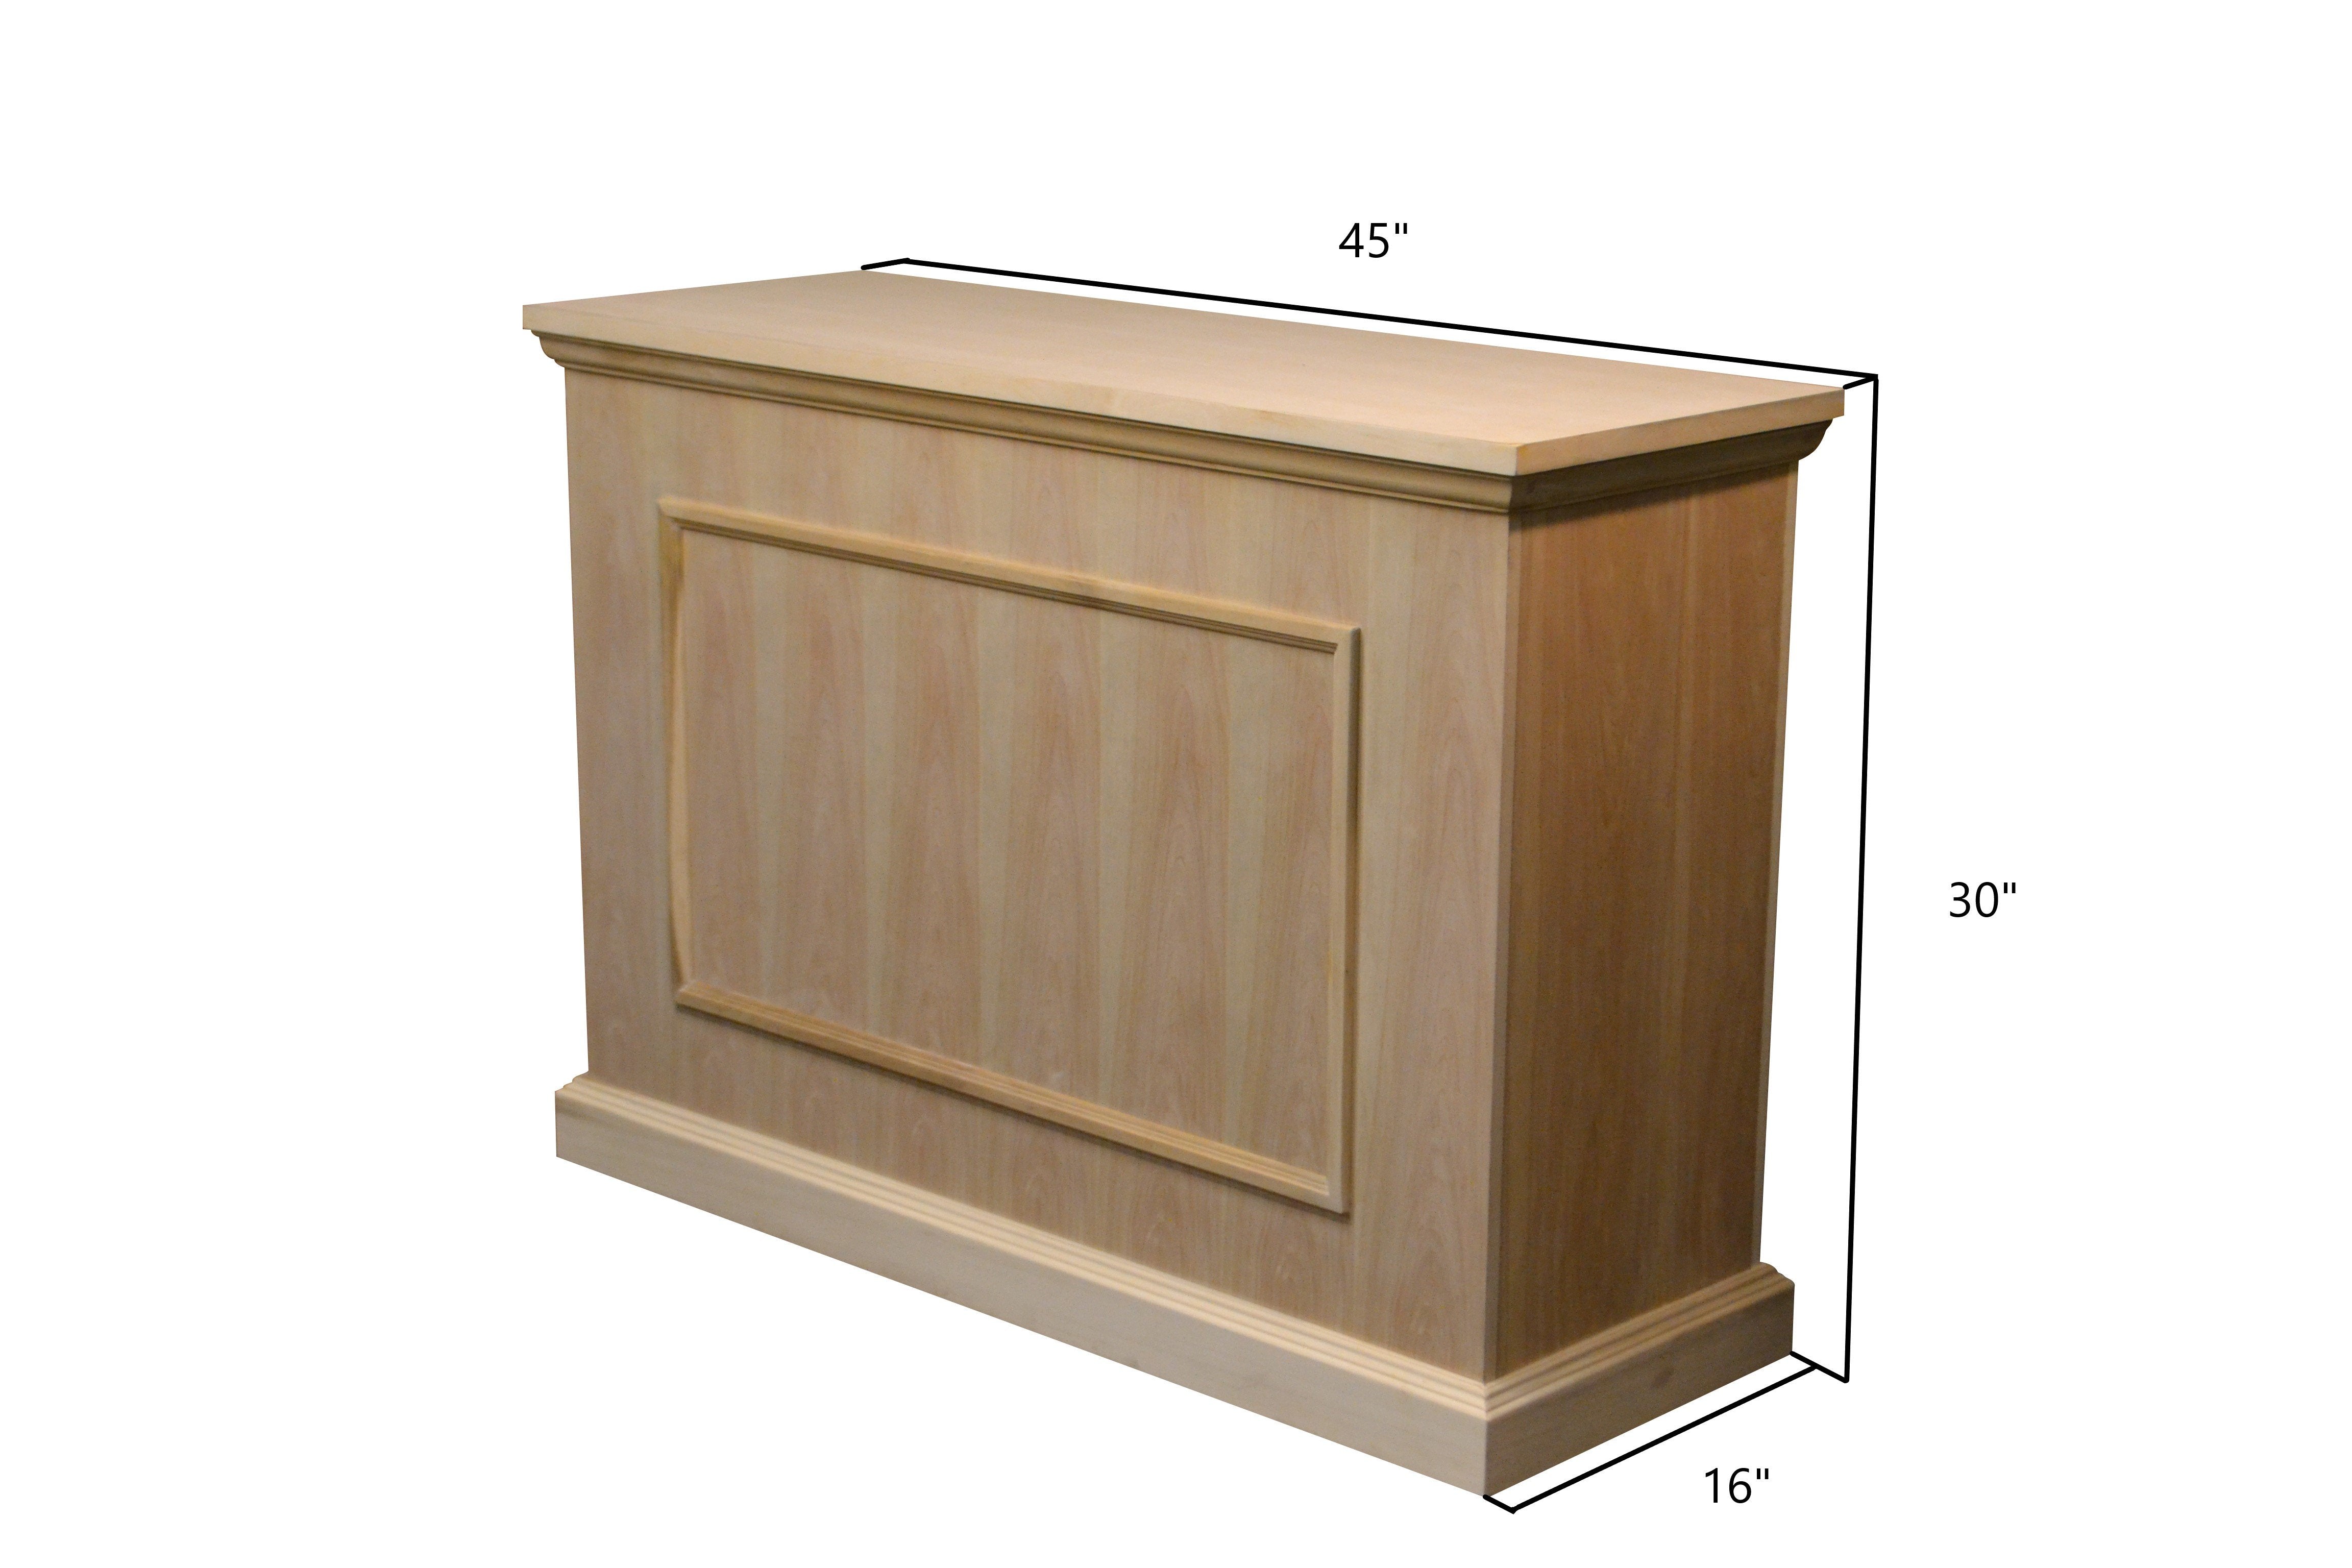 Mini Elevate 75012 Unfinished TV Lift Cabinet for  Flat screen TVs measurements. 